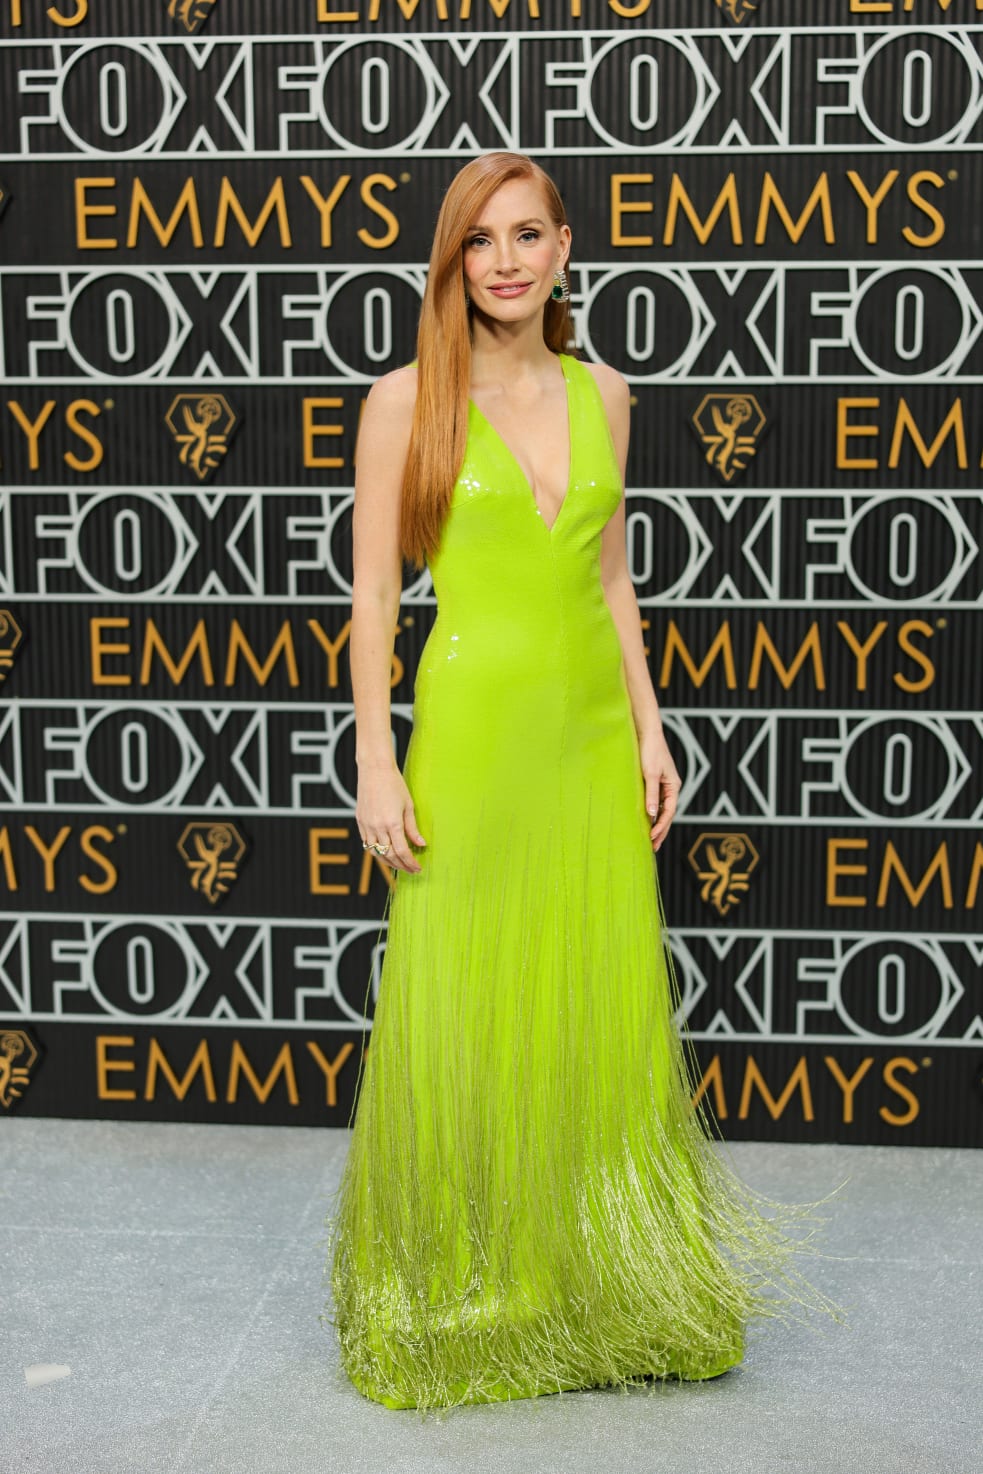 75th Primetime Emmy Awards: Jessica Chastein looks stunning in her green gown for the red carpet